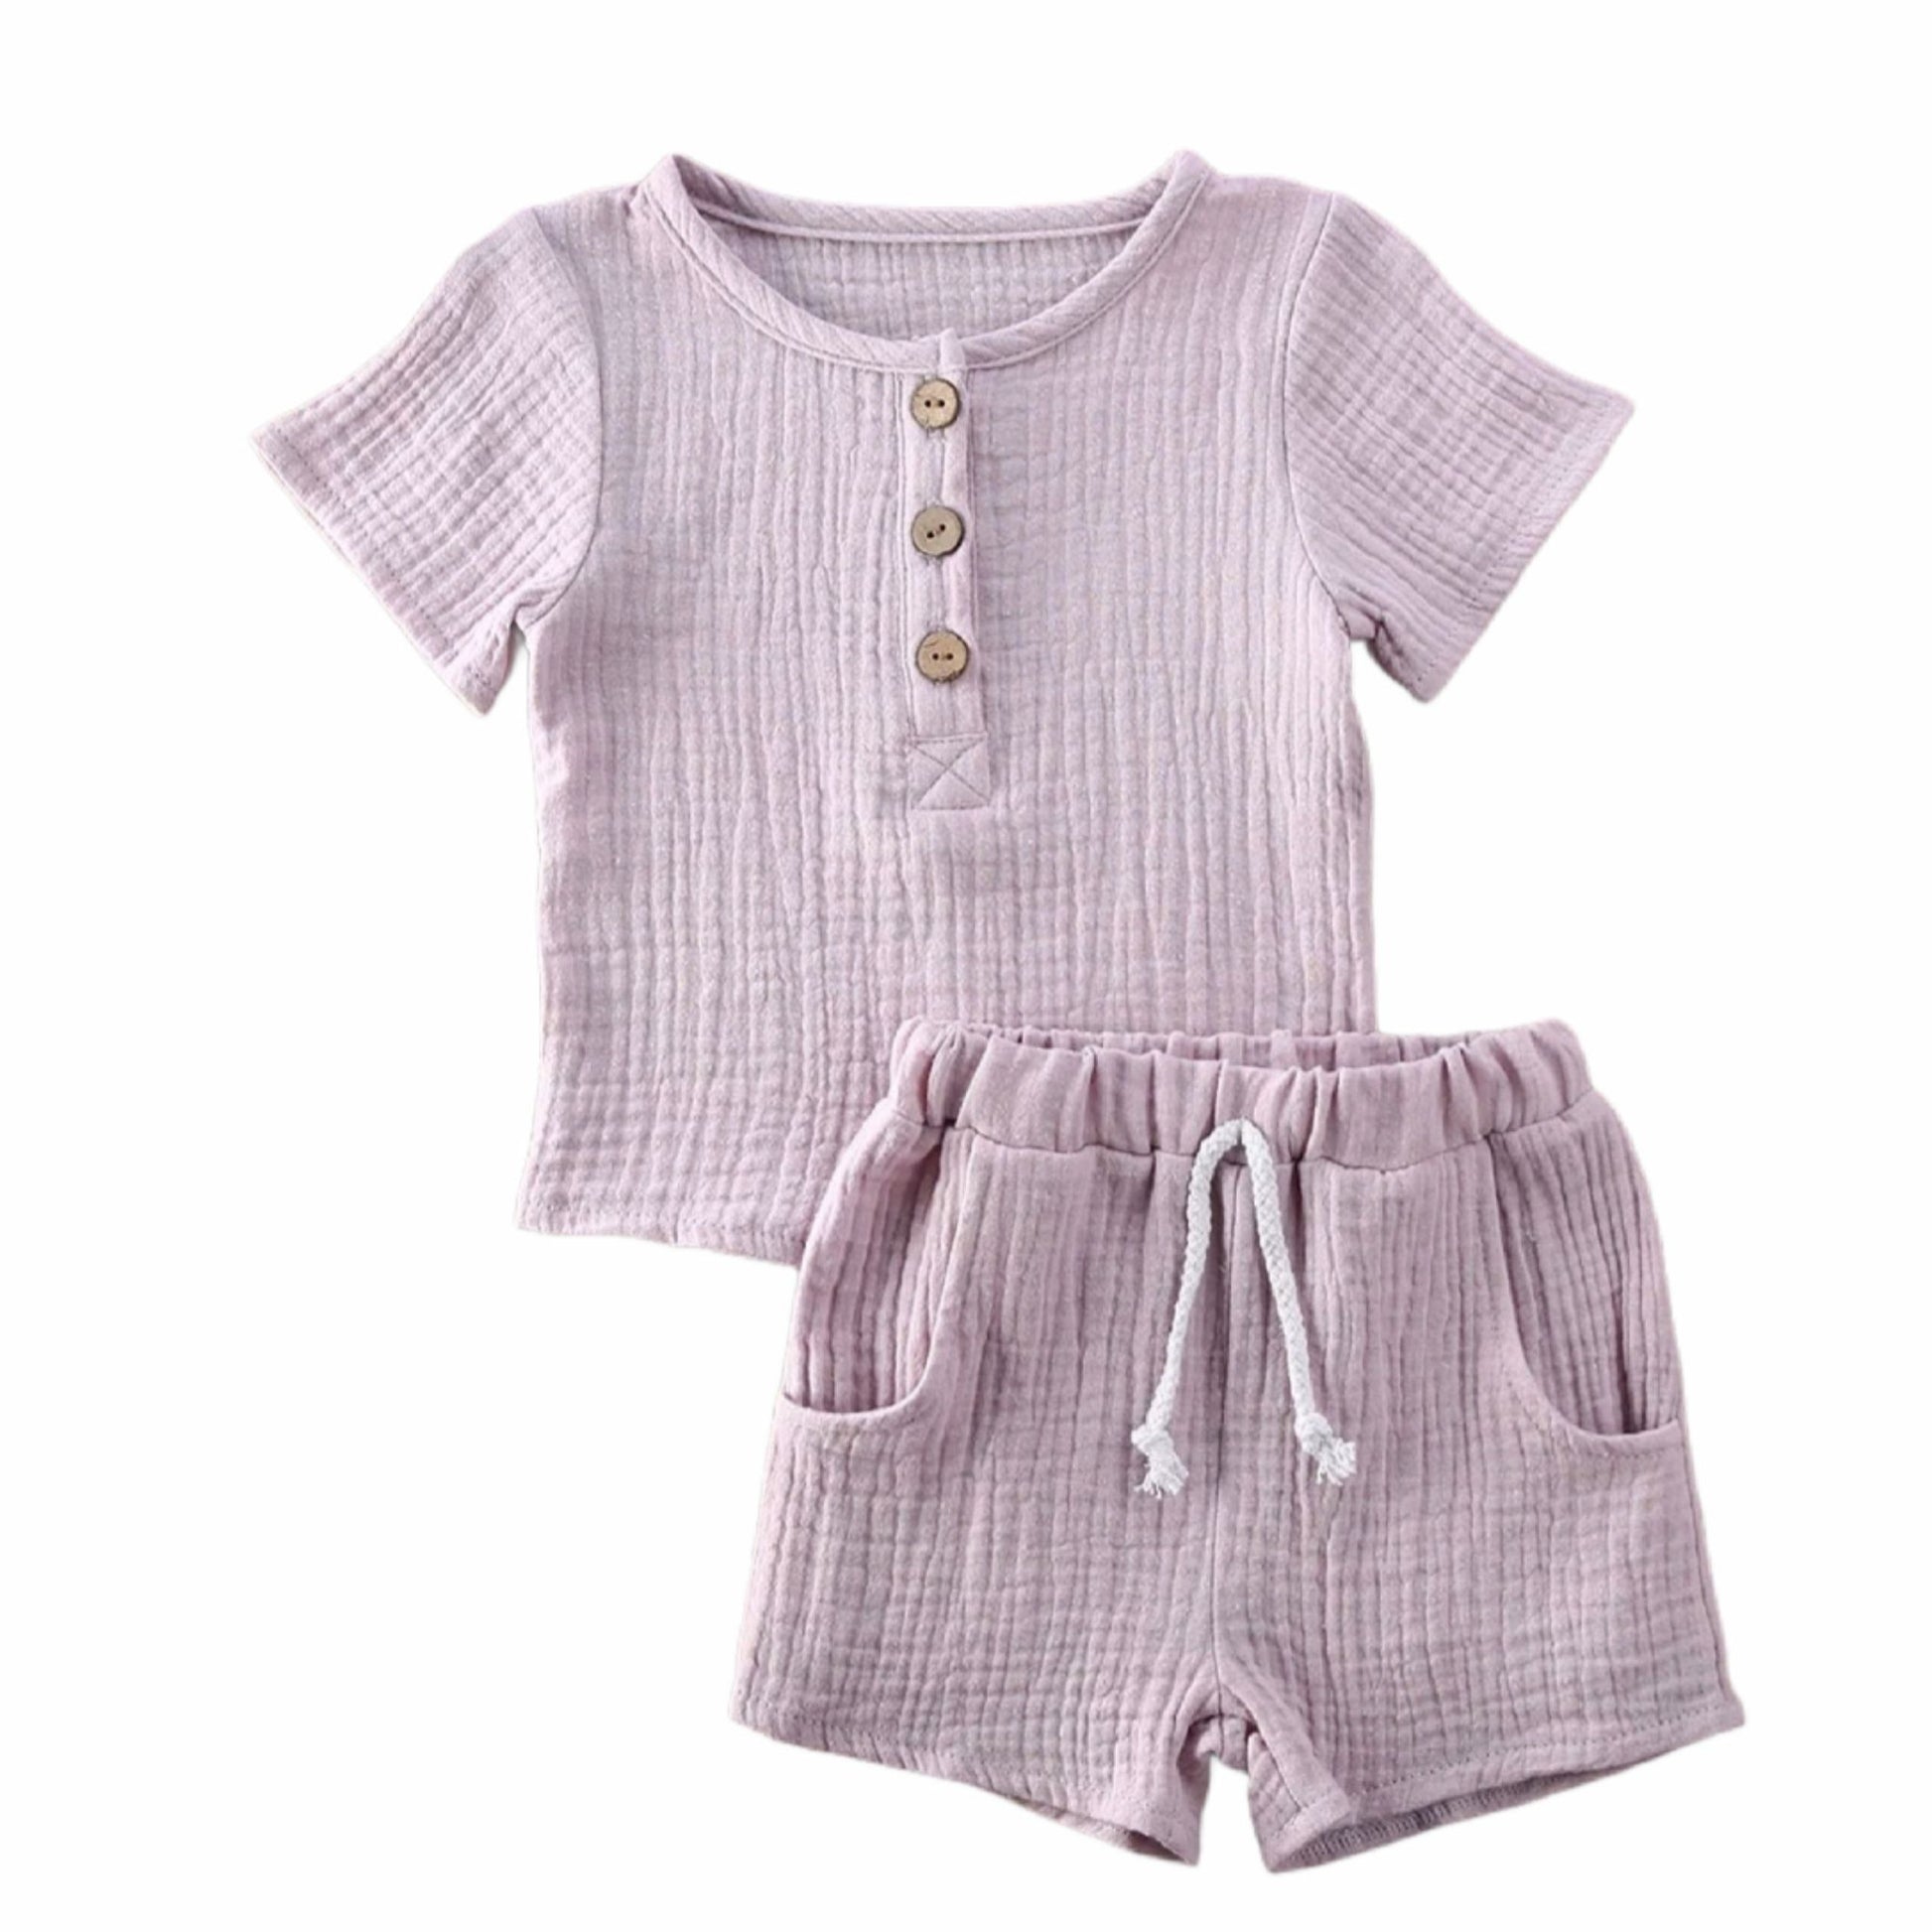 pink summer set for babies and toddlers and girls, two piece set with shirt and shorts, cotton | Hunny Bubba Kids